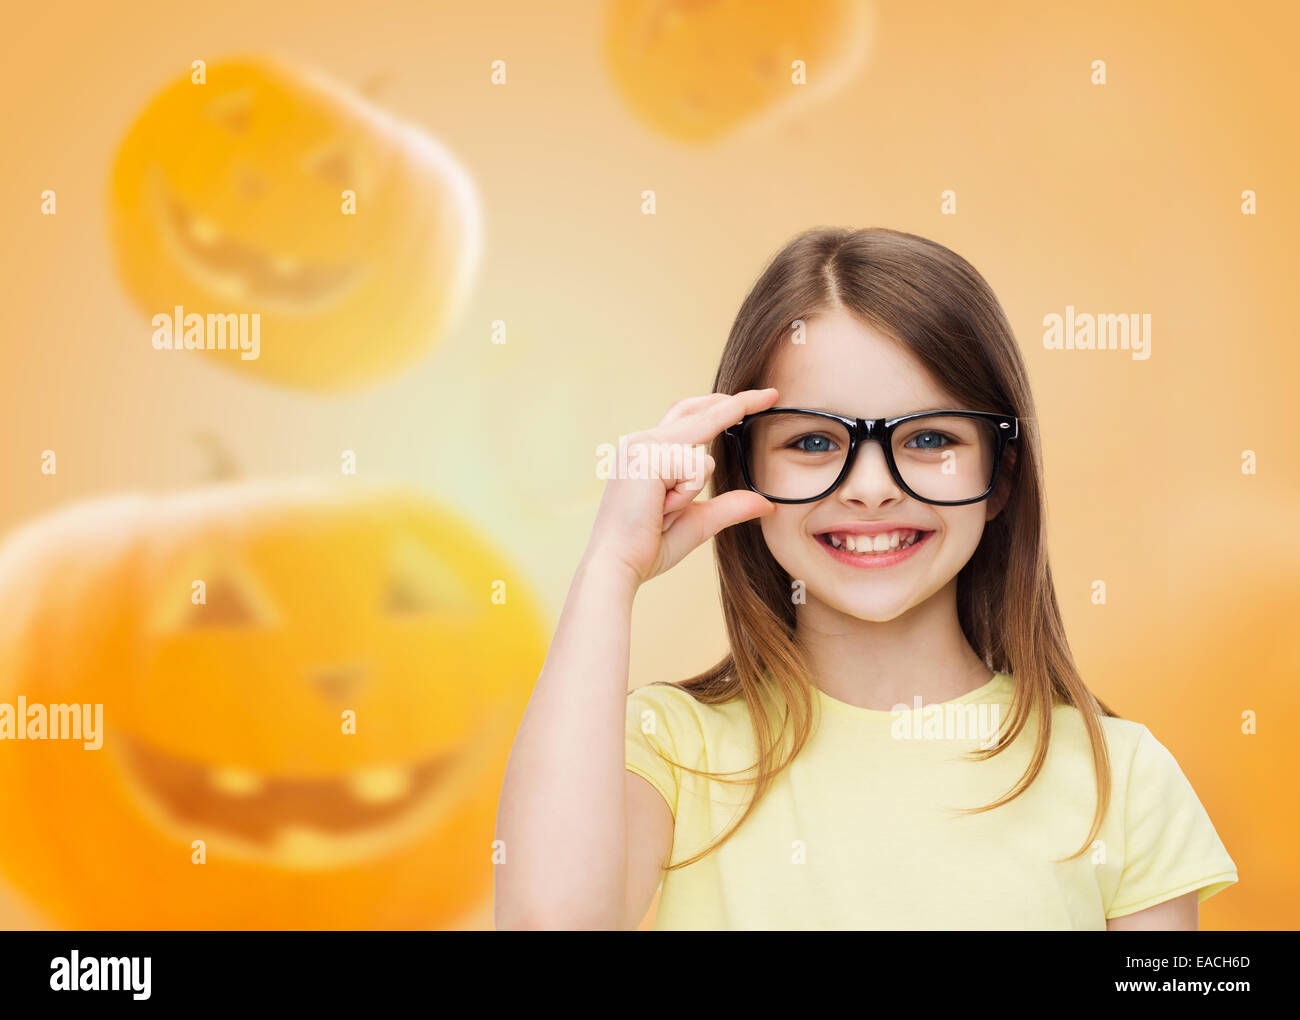 smiling girl in glasses over pumpkins background Stock Photo